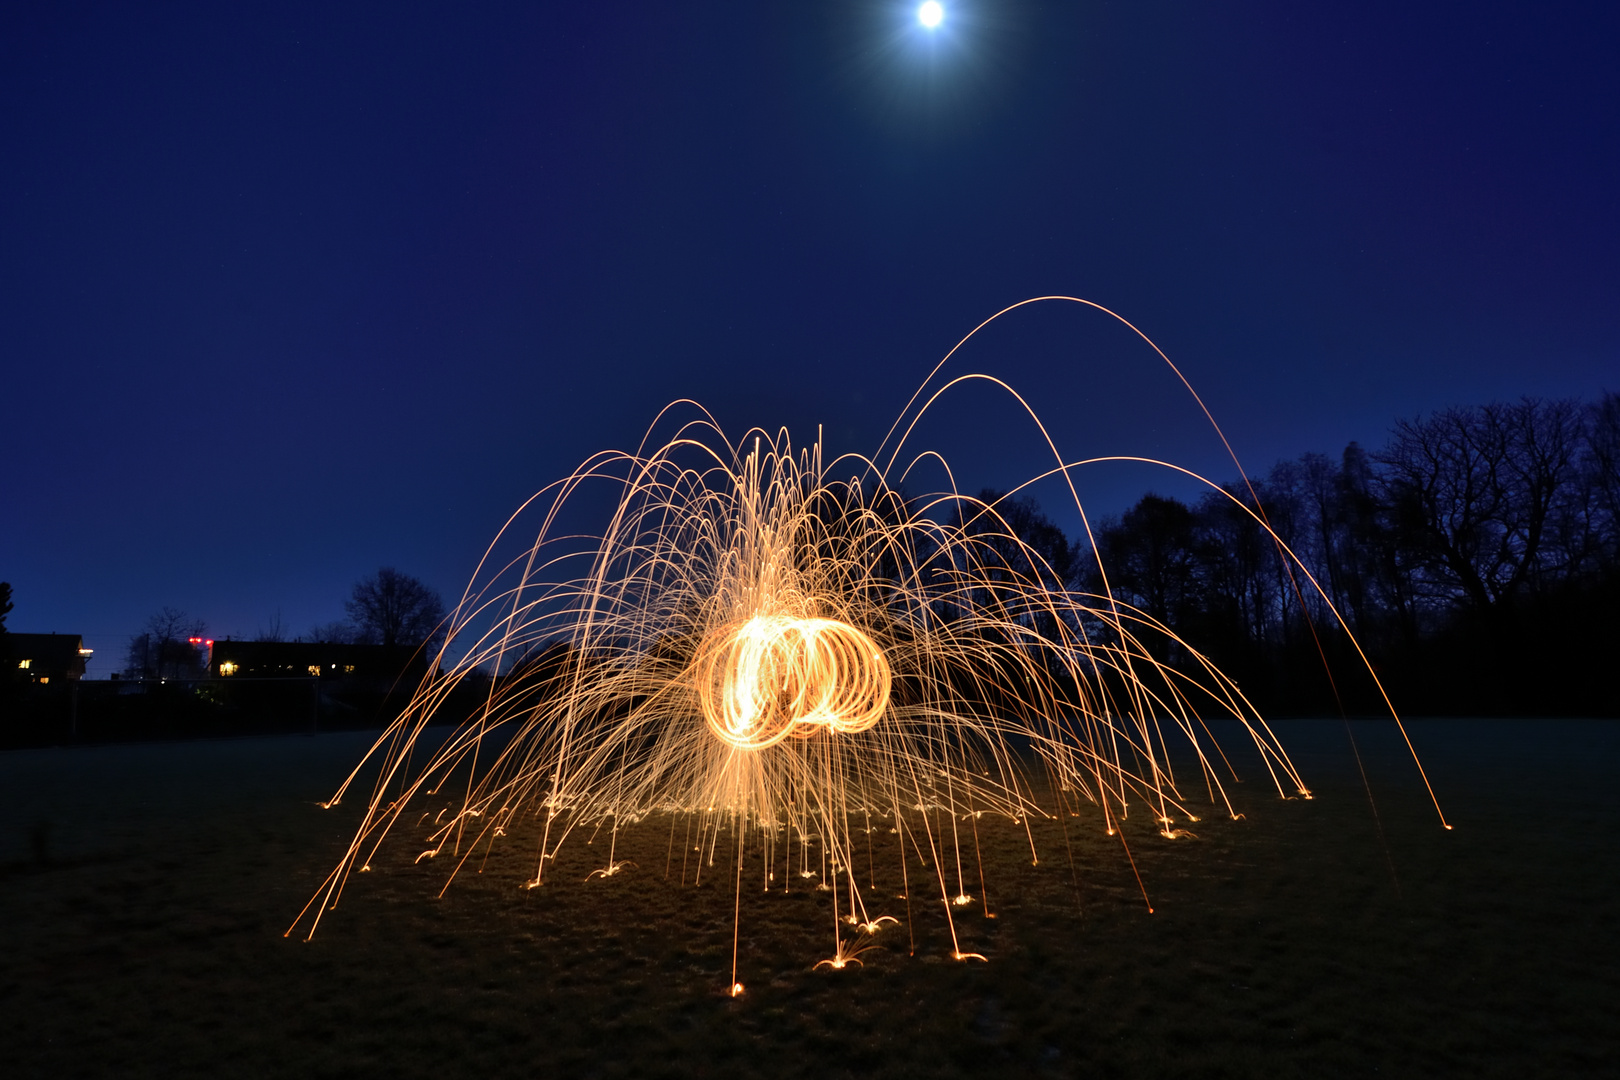 Paint lighting Fire spinning from steel wool